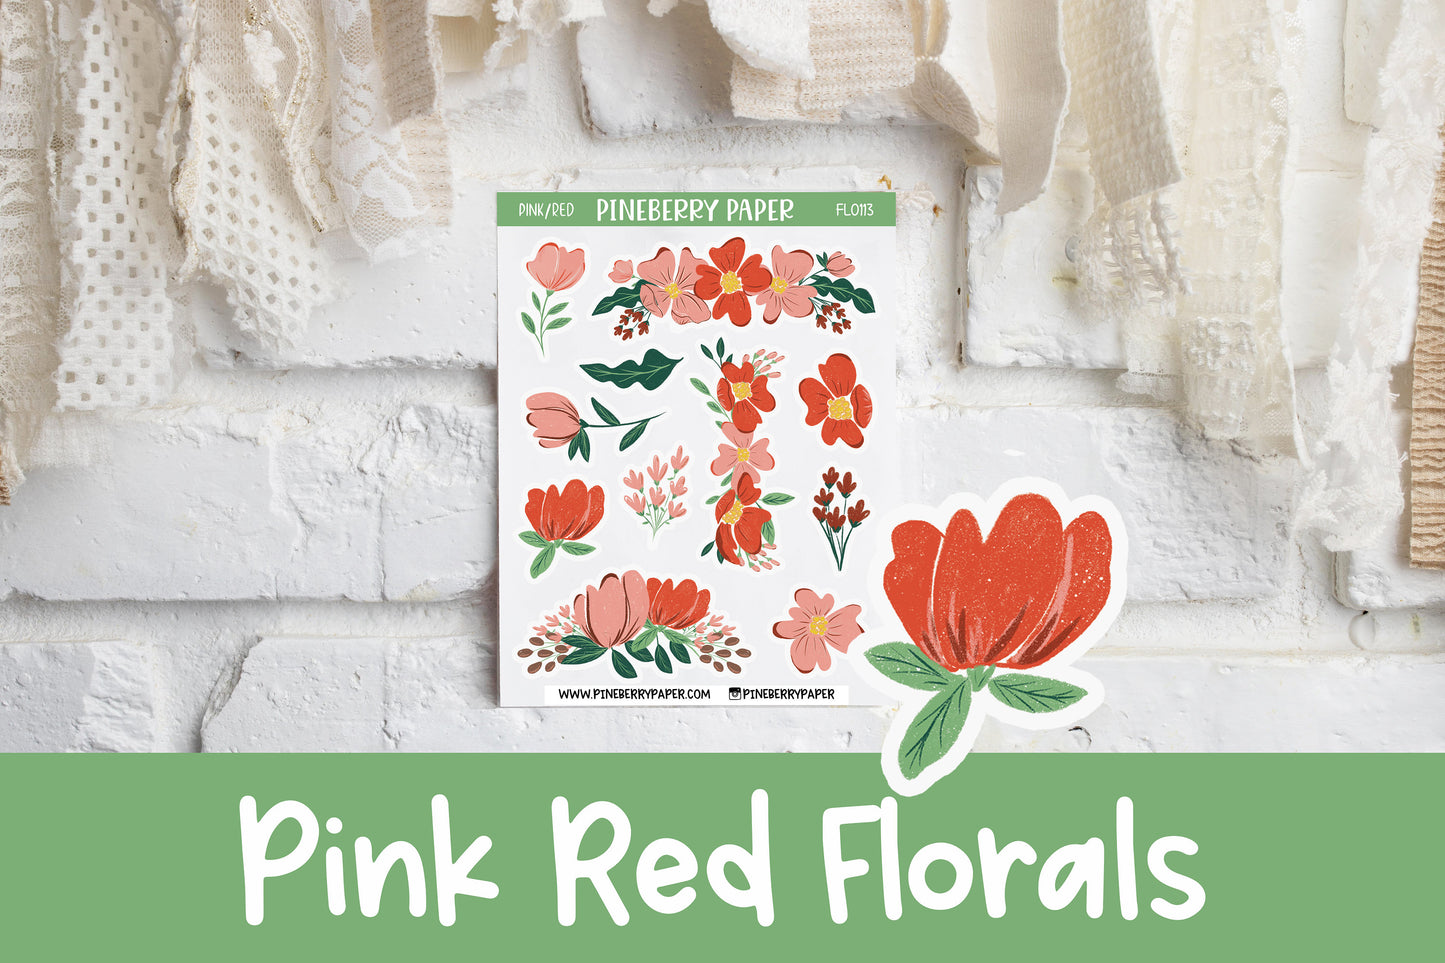 Pink & Red Flowers | FL0113